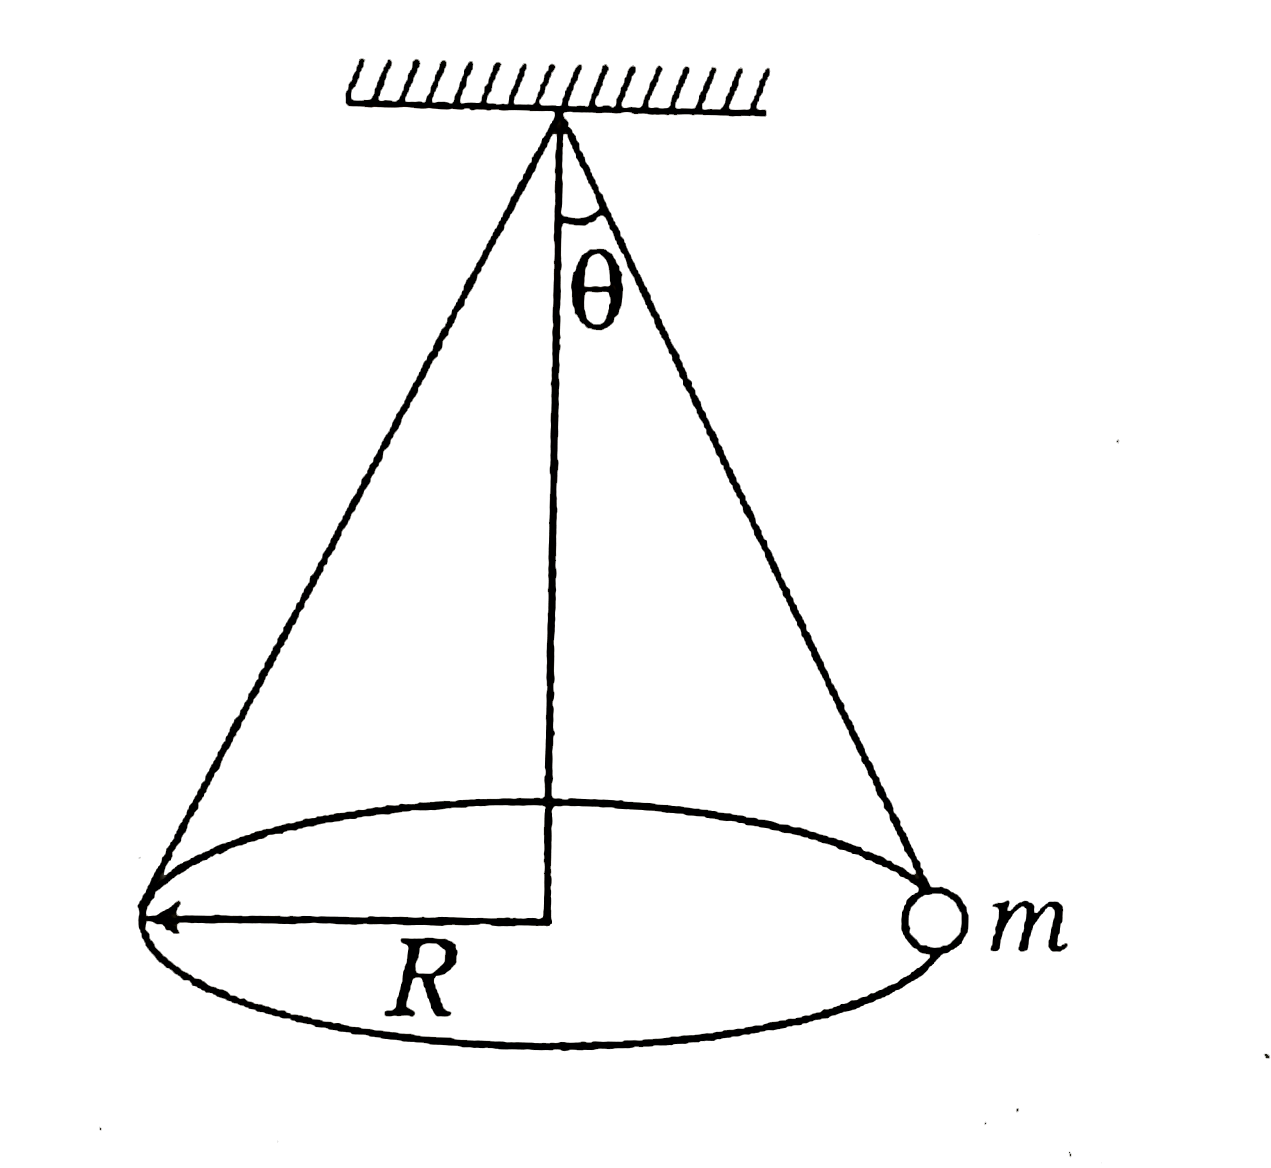 A conical pendulum of length L makes an angle theta with the vertical. The time period will be